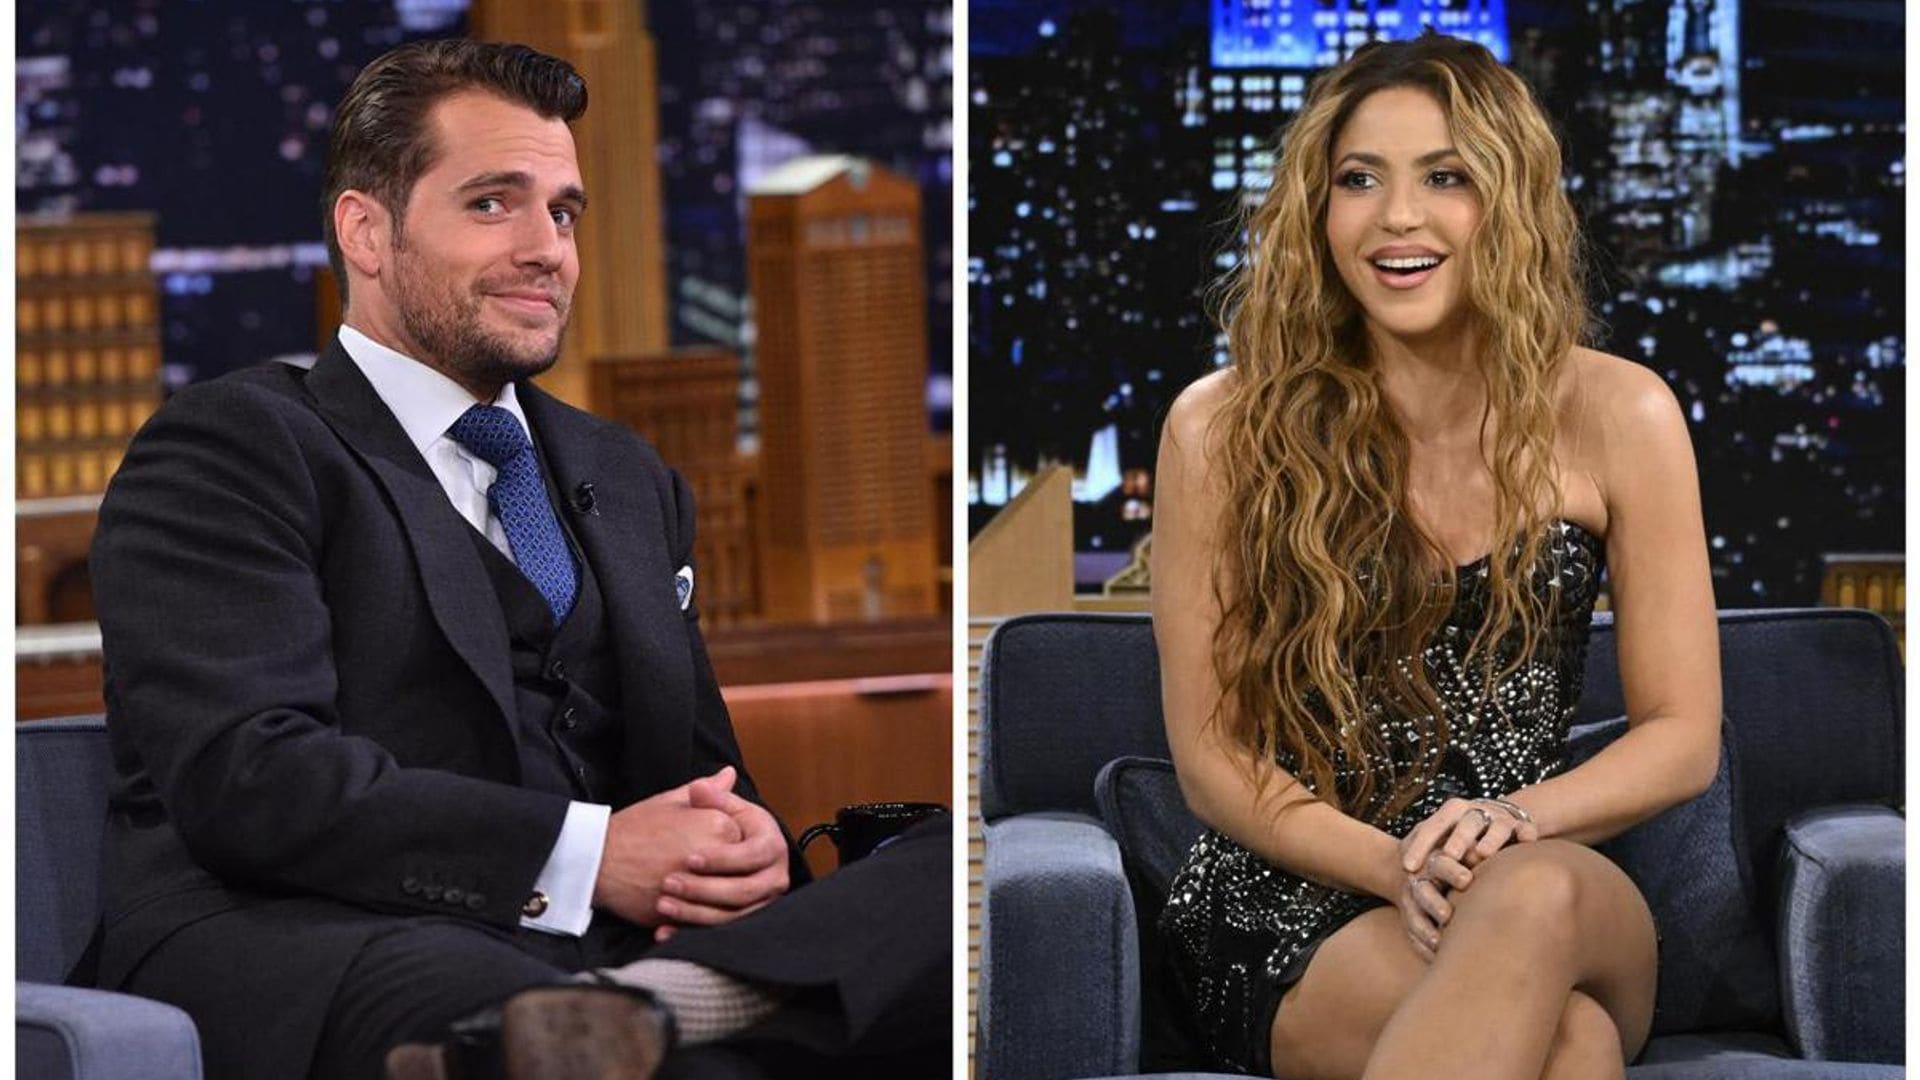 Henry Cavill opens up about Shakira: Setting the record straight on rumors and romance